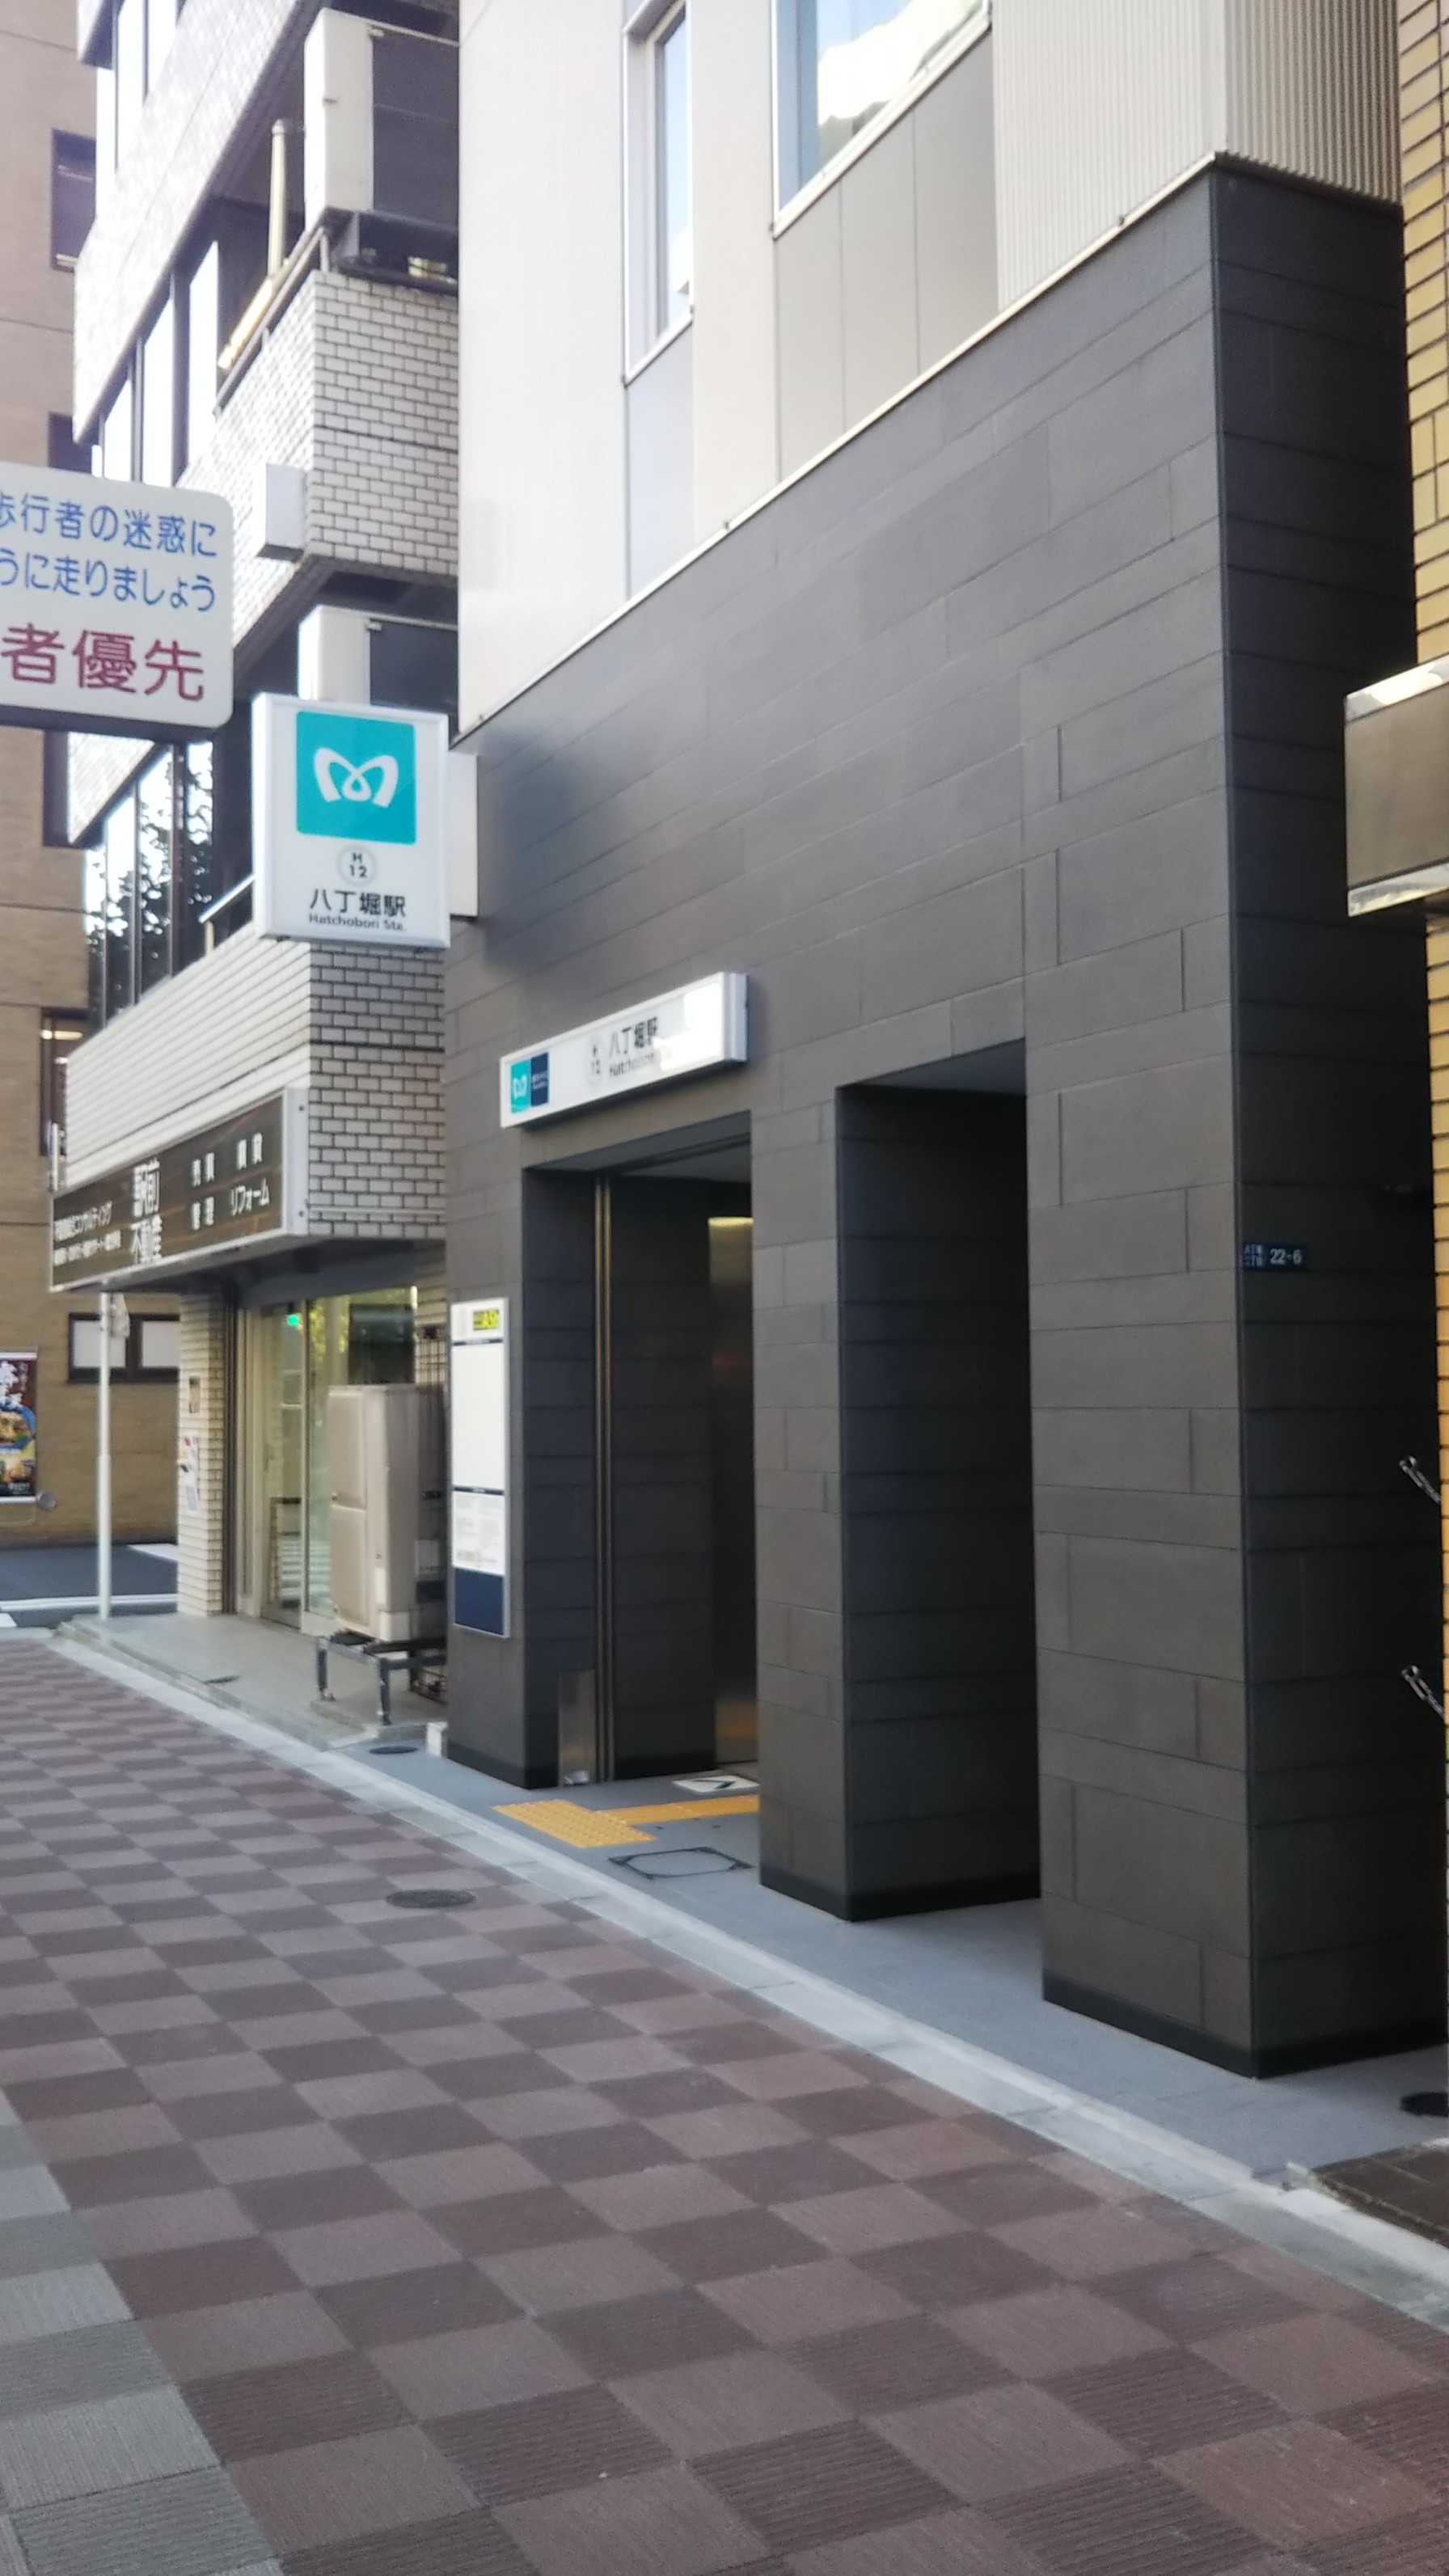 Tokyo metro Hachobori station☆The Tokyo House☆”Convenient for commuting”